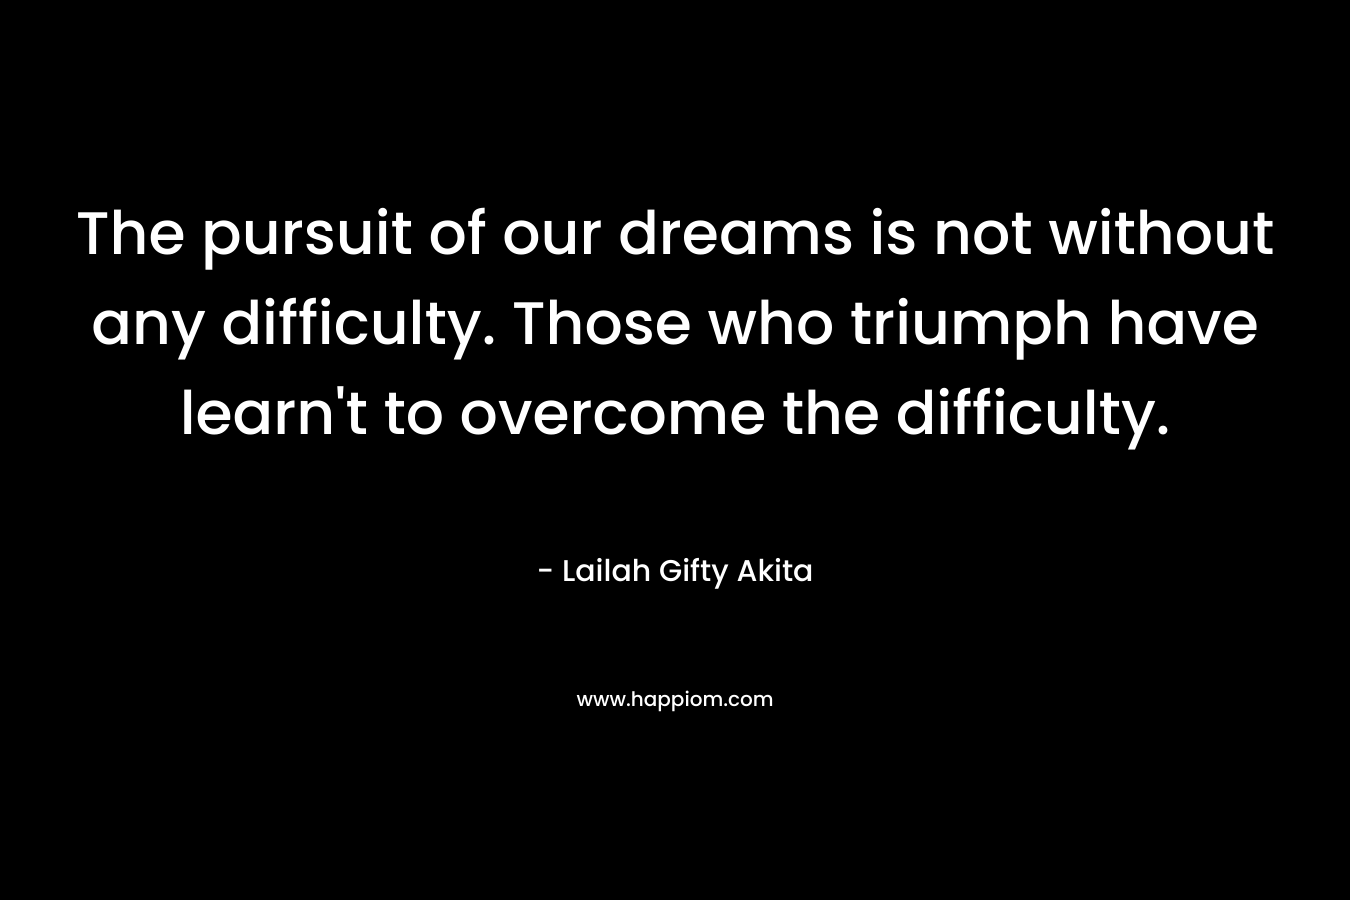 The pursuit of our dreams is not without any difficulty. Those who triumph have learn't to overcome the difficulty.